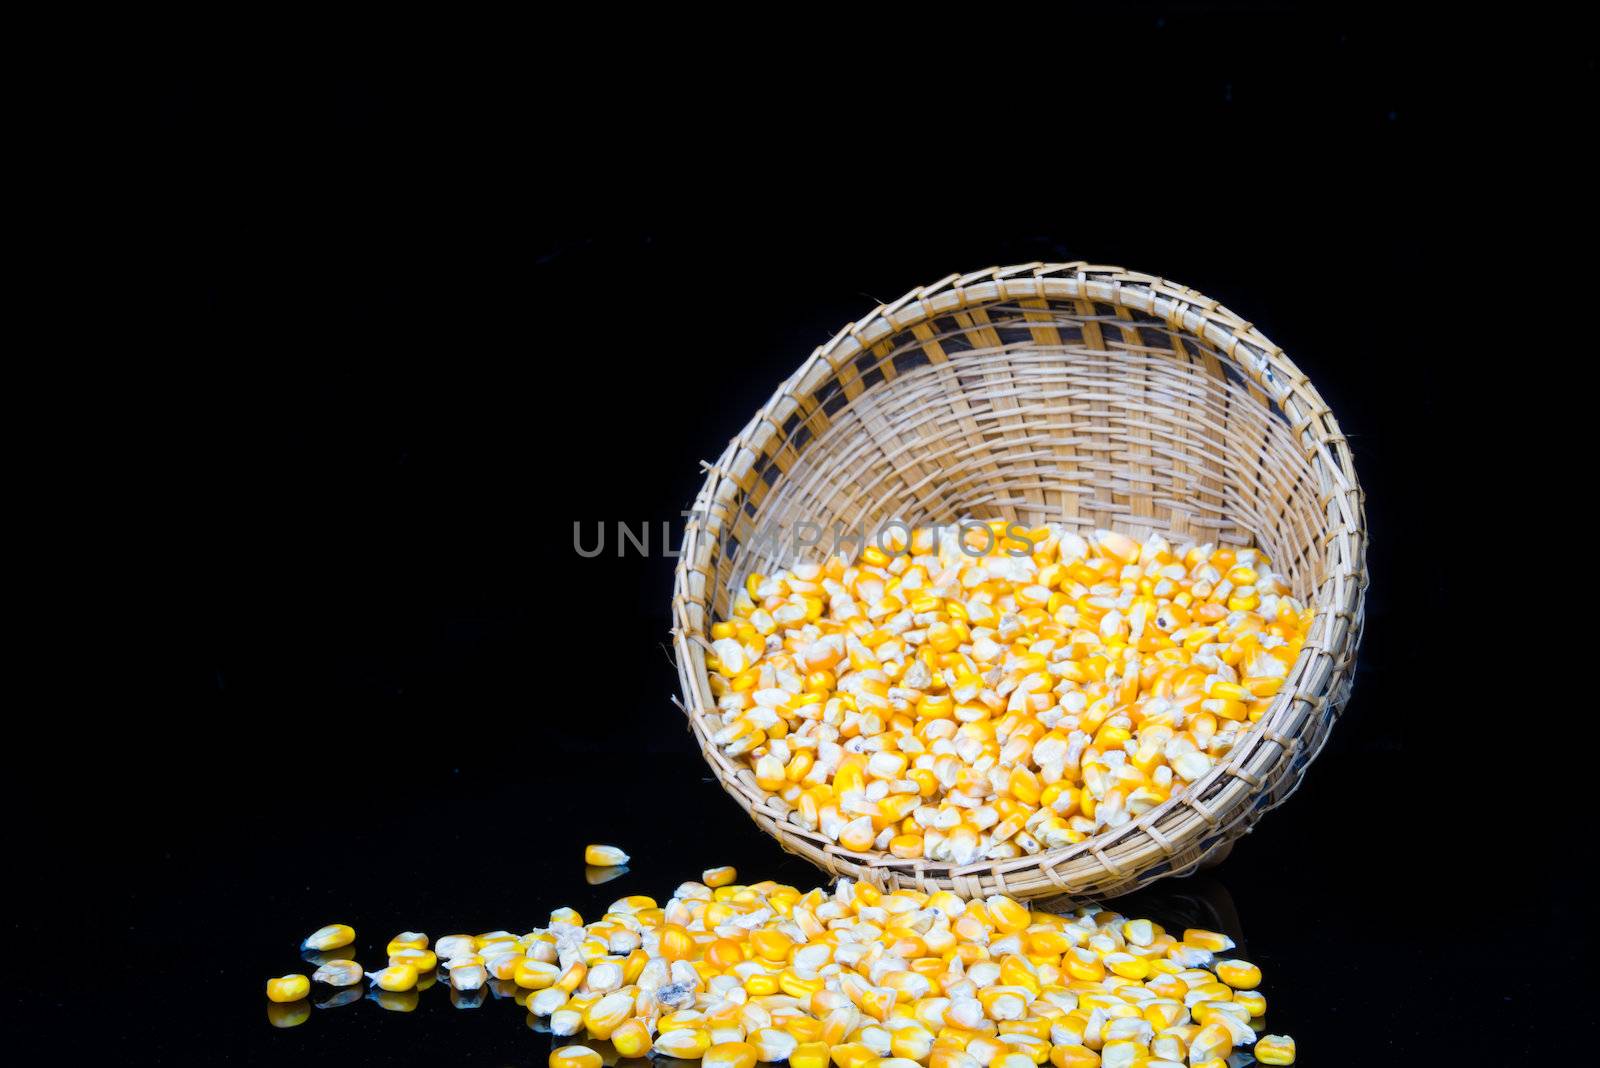 corn and corn seeds in a Basket  by wmitrmatr